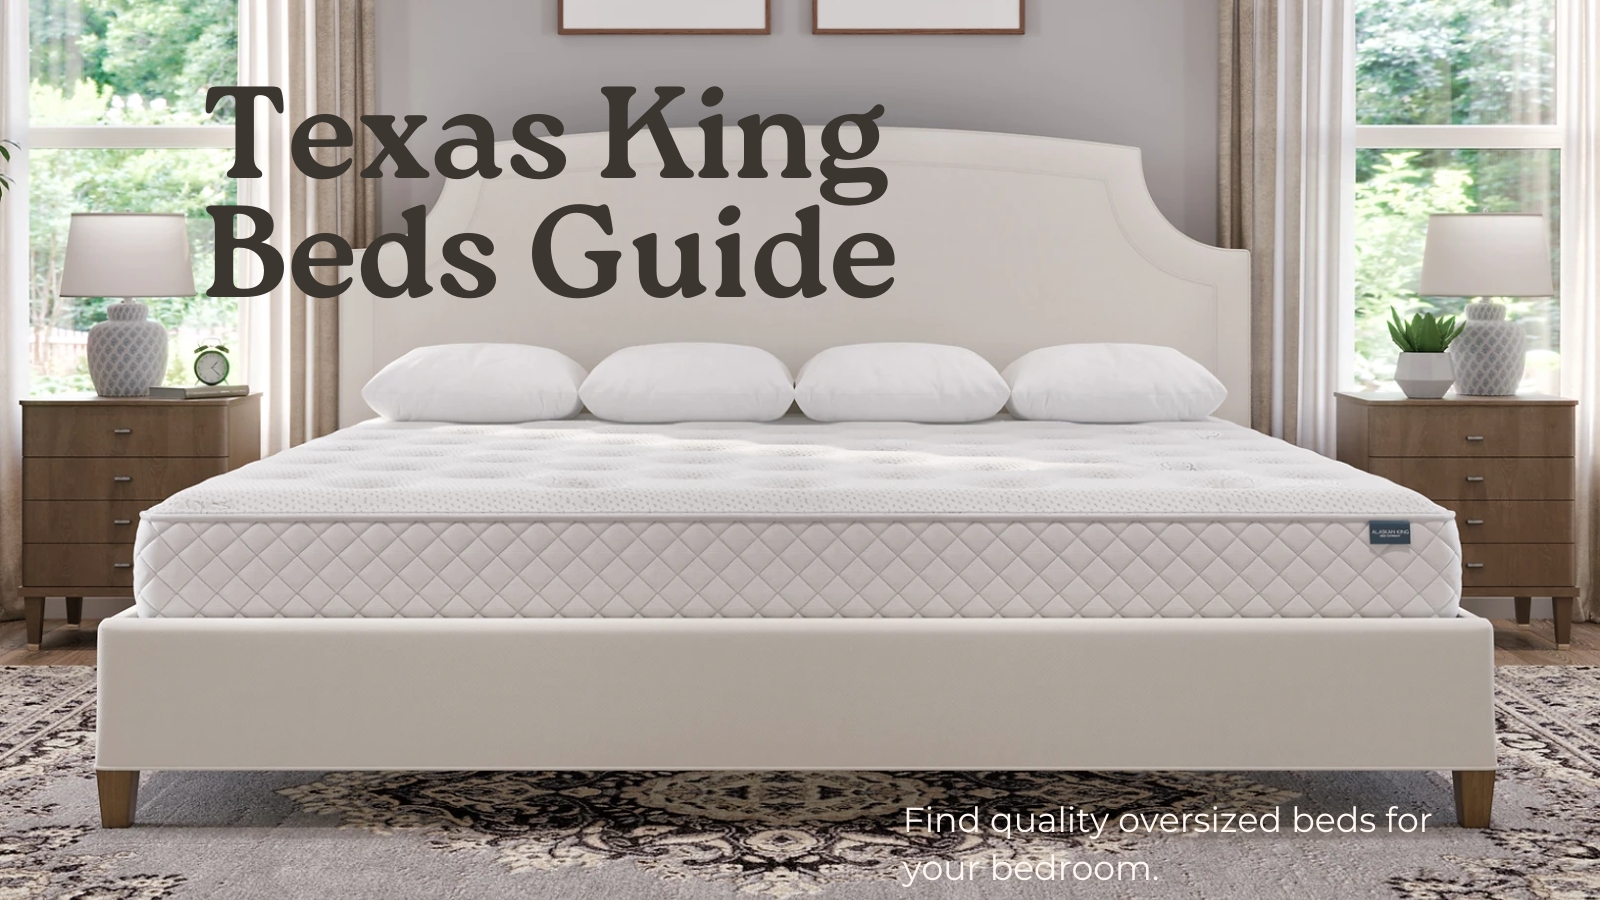 texas king beds guide